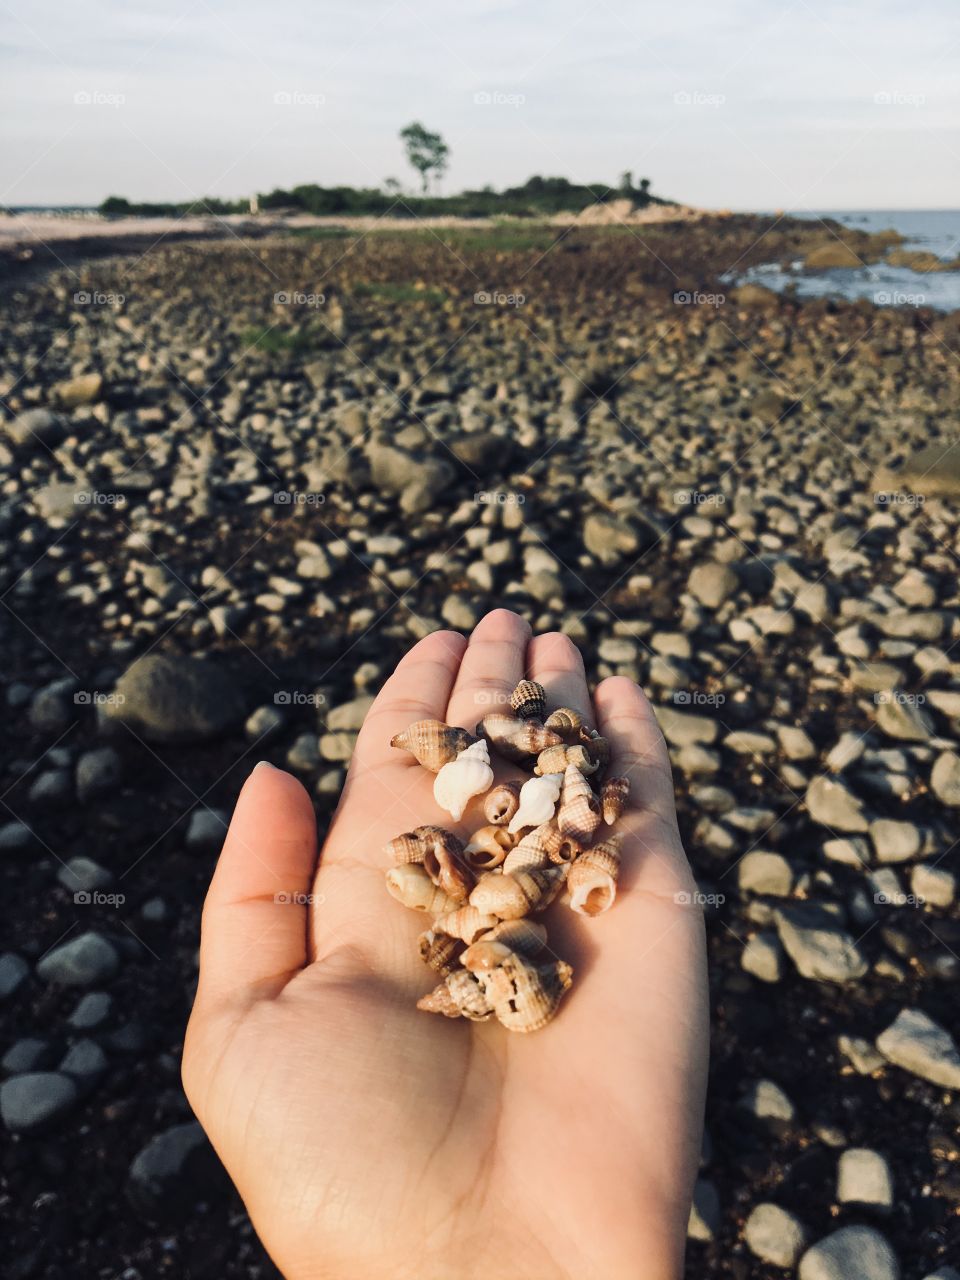 Always collecting shells from every beach I visit 